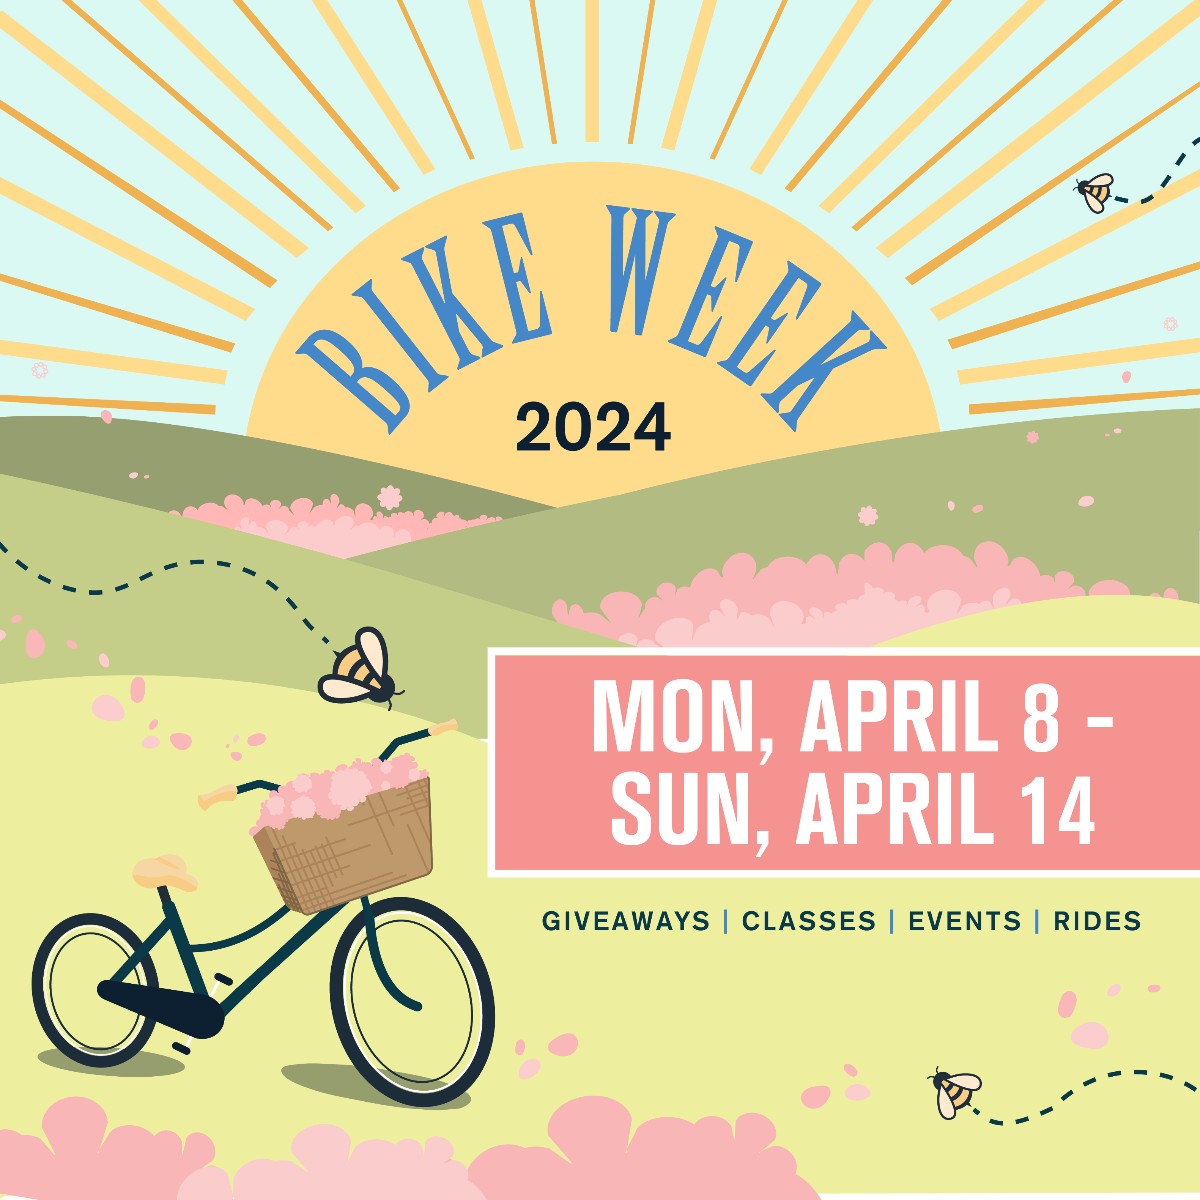 Gear up for spring with #UMDBikeWeek! From April 8-14, join @DOTS_UMD and @UMDRecWell for an action-packed week of group bike rides, giveaways, smoothies, and more. Check out full info and all of the events at dotsumd.fyi/bike-week.